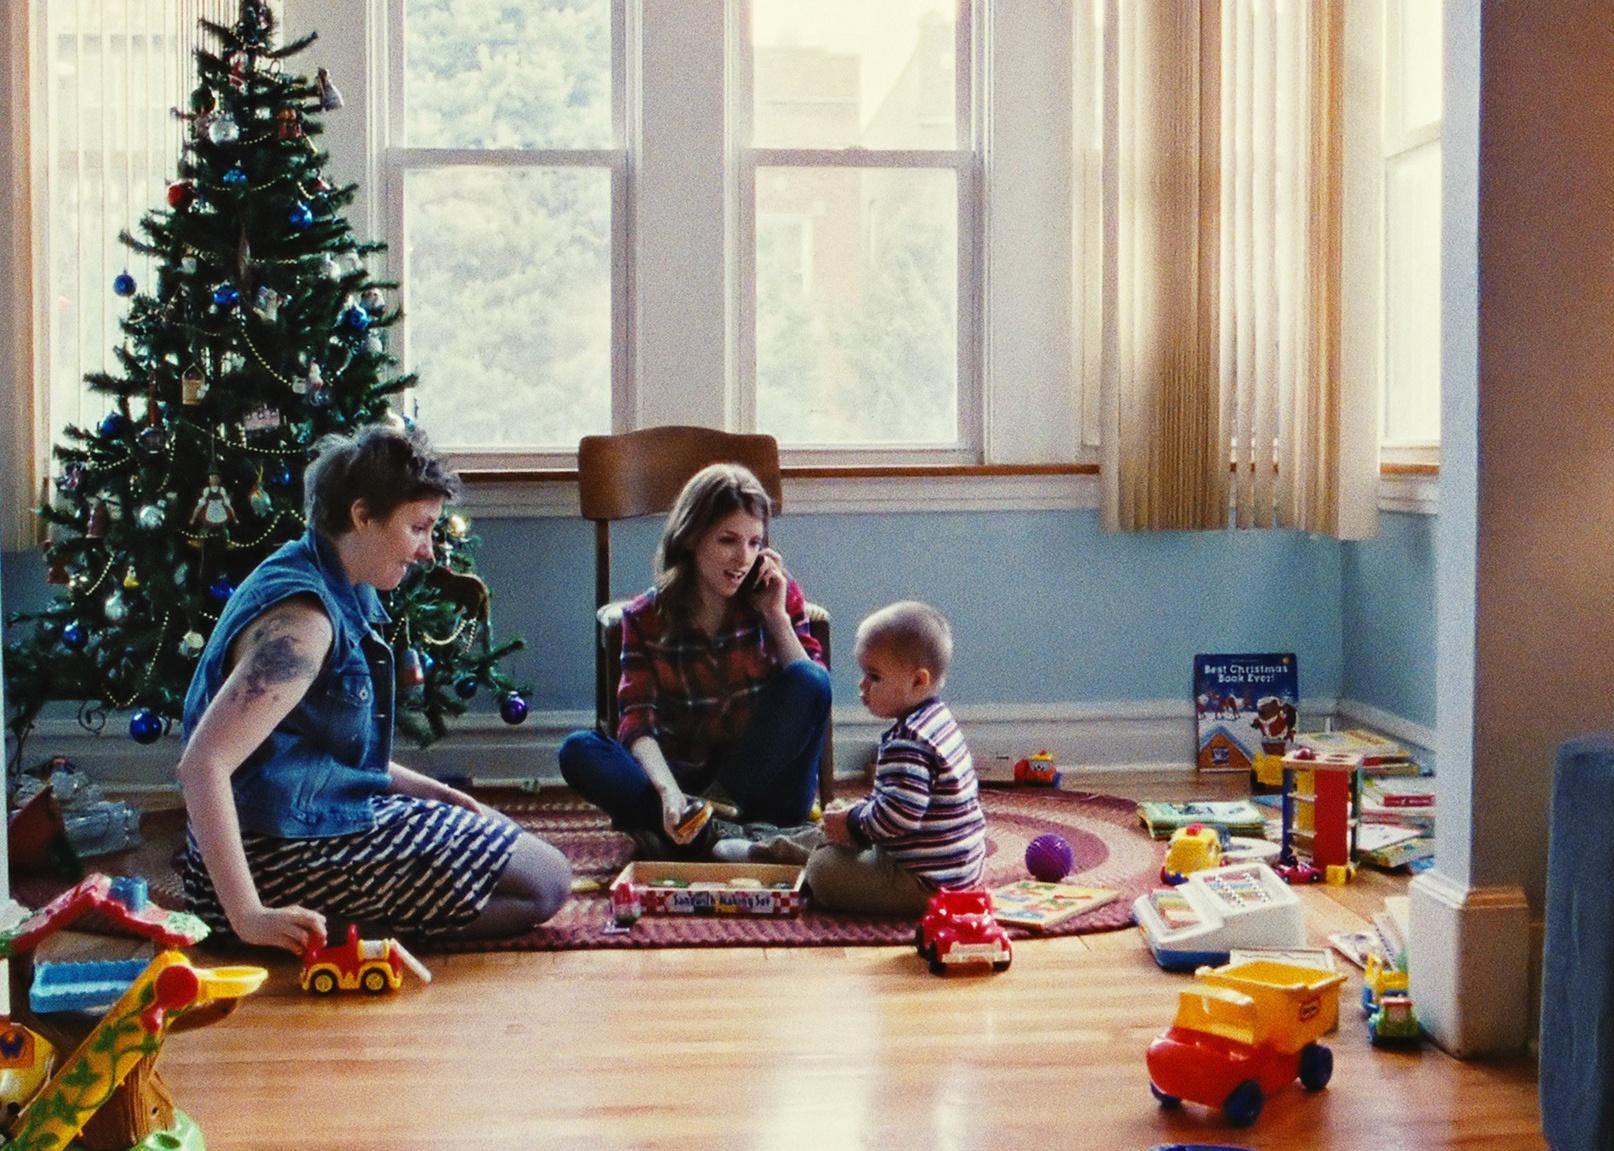 Anna Kendrick and Lena Dunham sitting on the floor in front of a Christmas tree playing with a little boy.